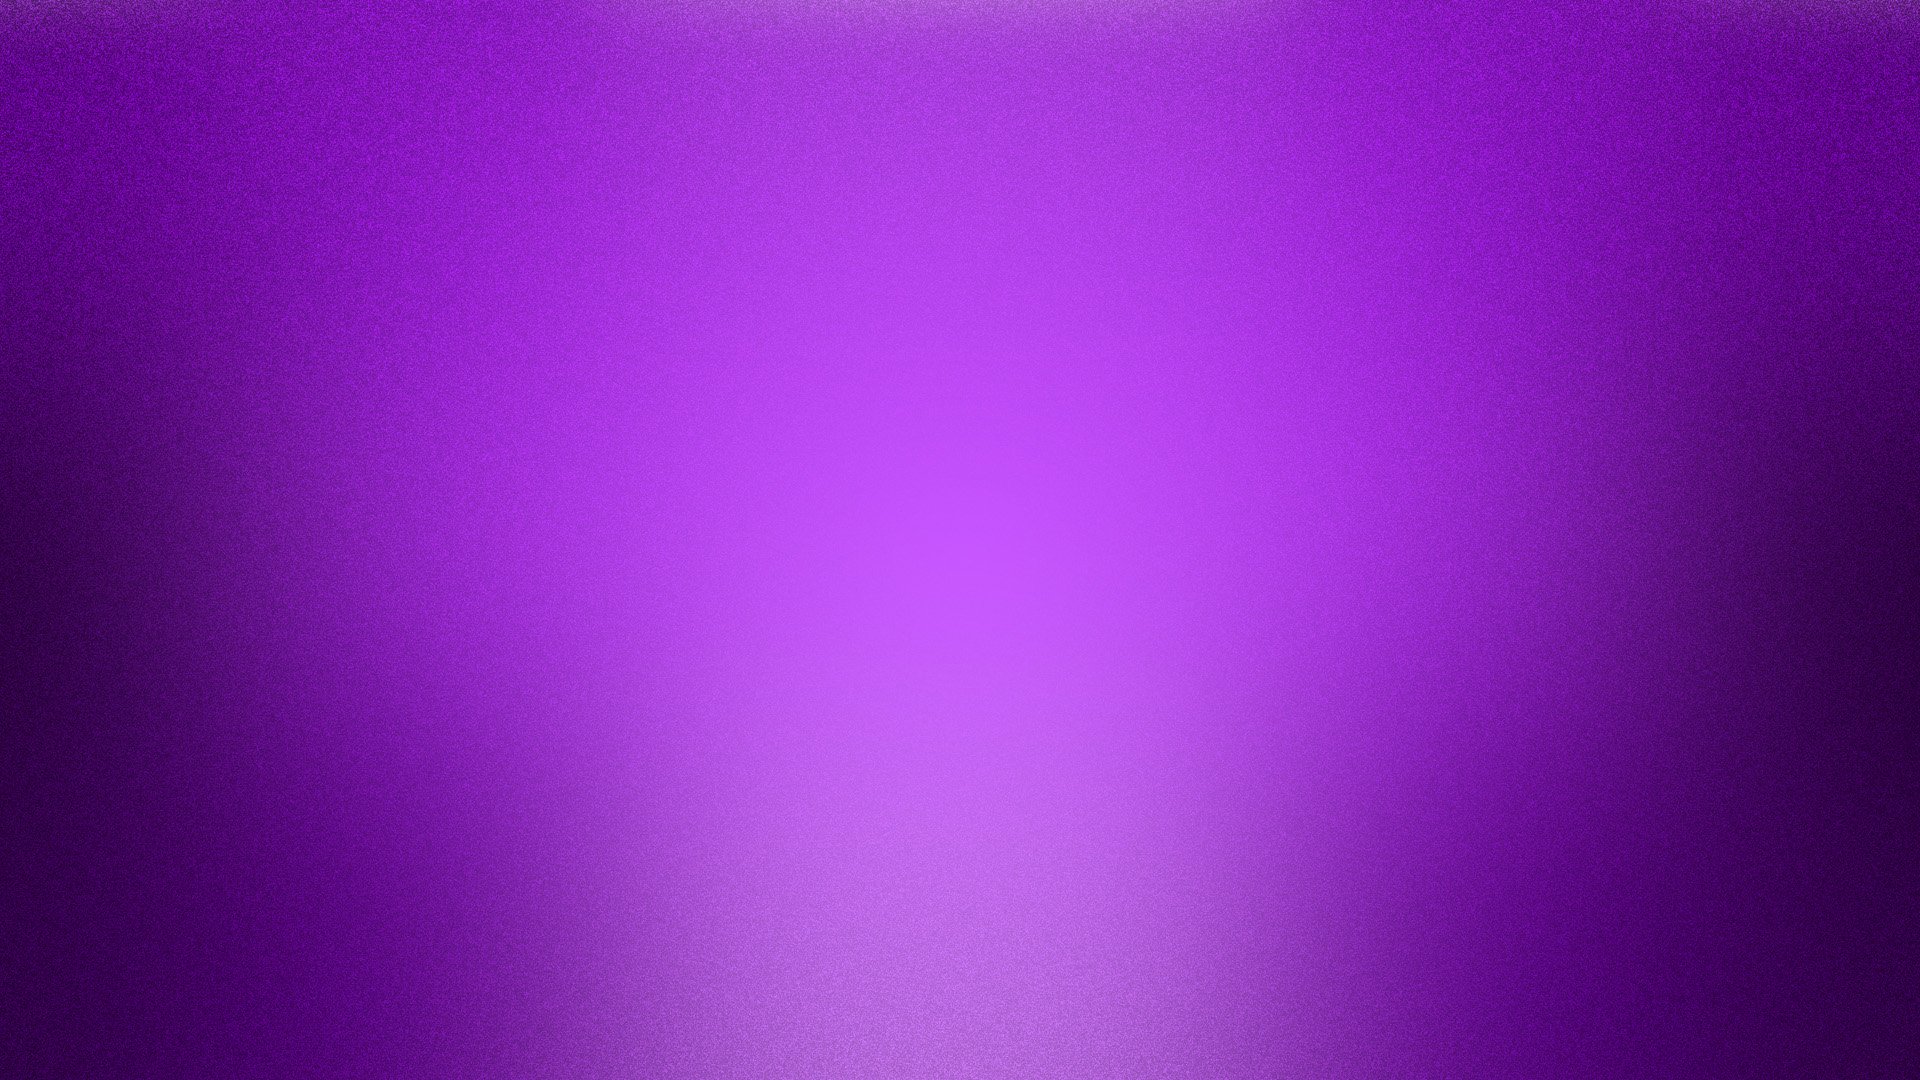 High Definition Purple Wallpaper Image For